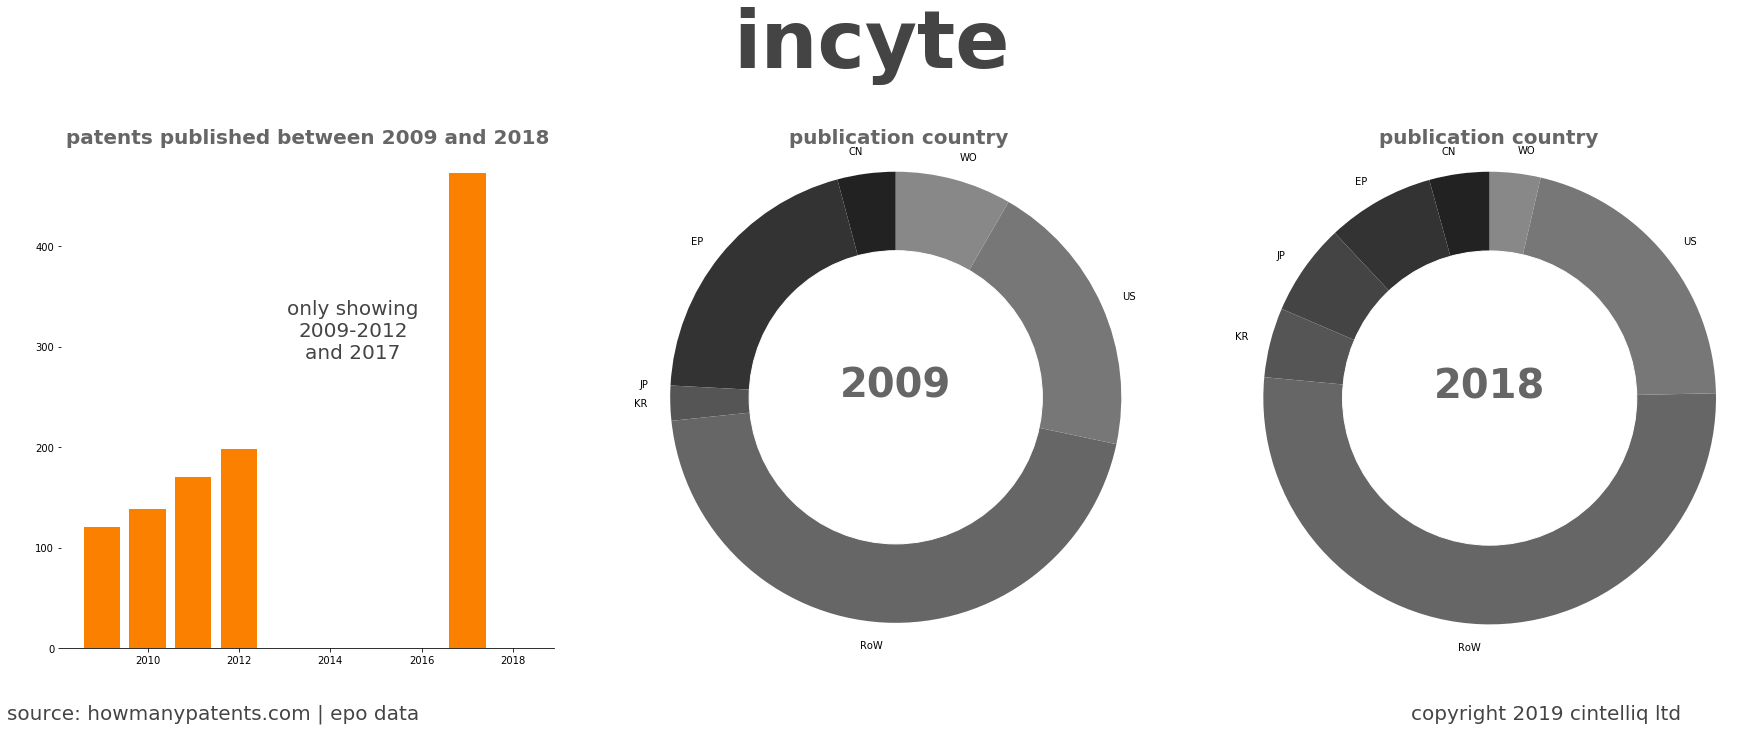 summary of patents for Incyte